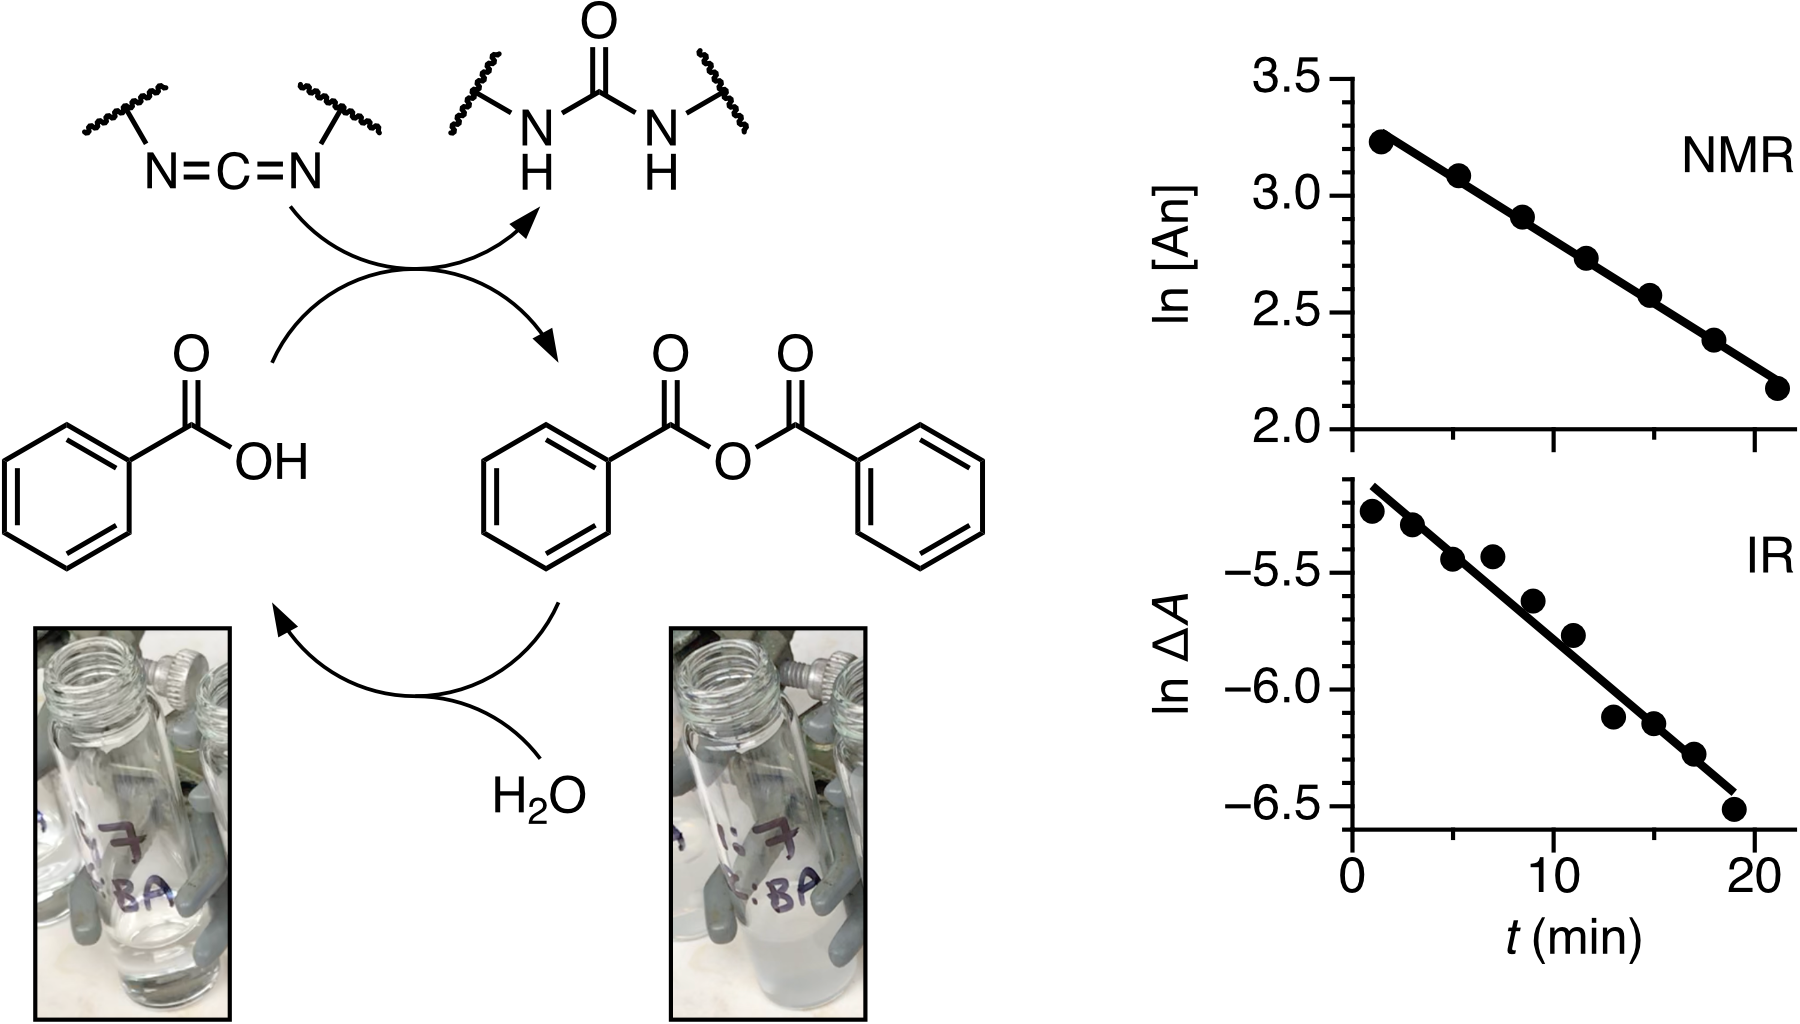 Table of contents figure for article "Observing the Transient Assembly and Disassembly of Carboxylic Anhydrides in the Organic Chemistry Laboratory" showing the formation and decomposition of benzoic anhydride and sample NMR and IR results.